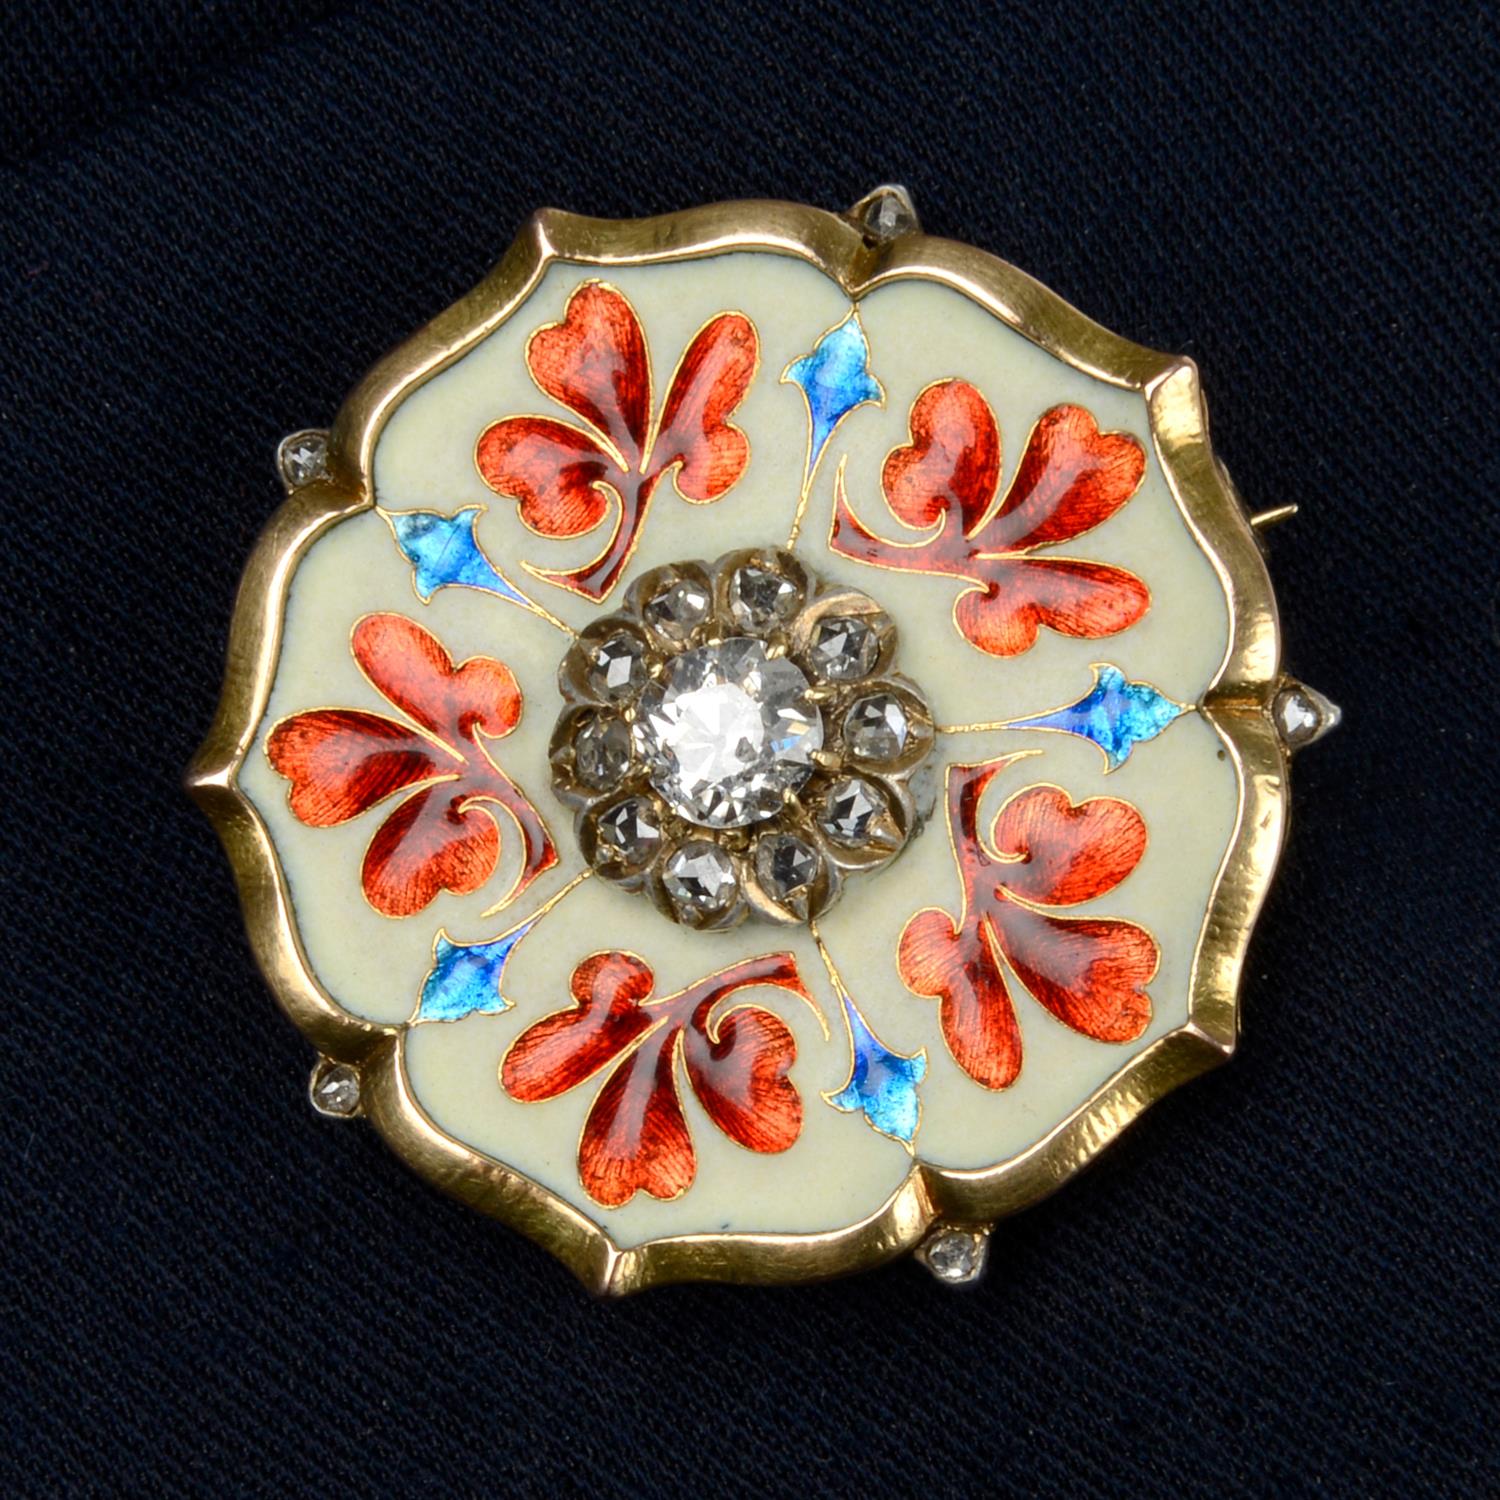 19th century diamond and enamel brooch, attributed to Falize